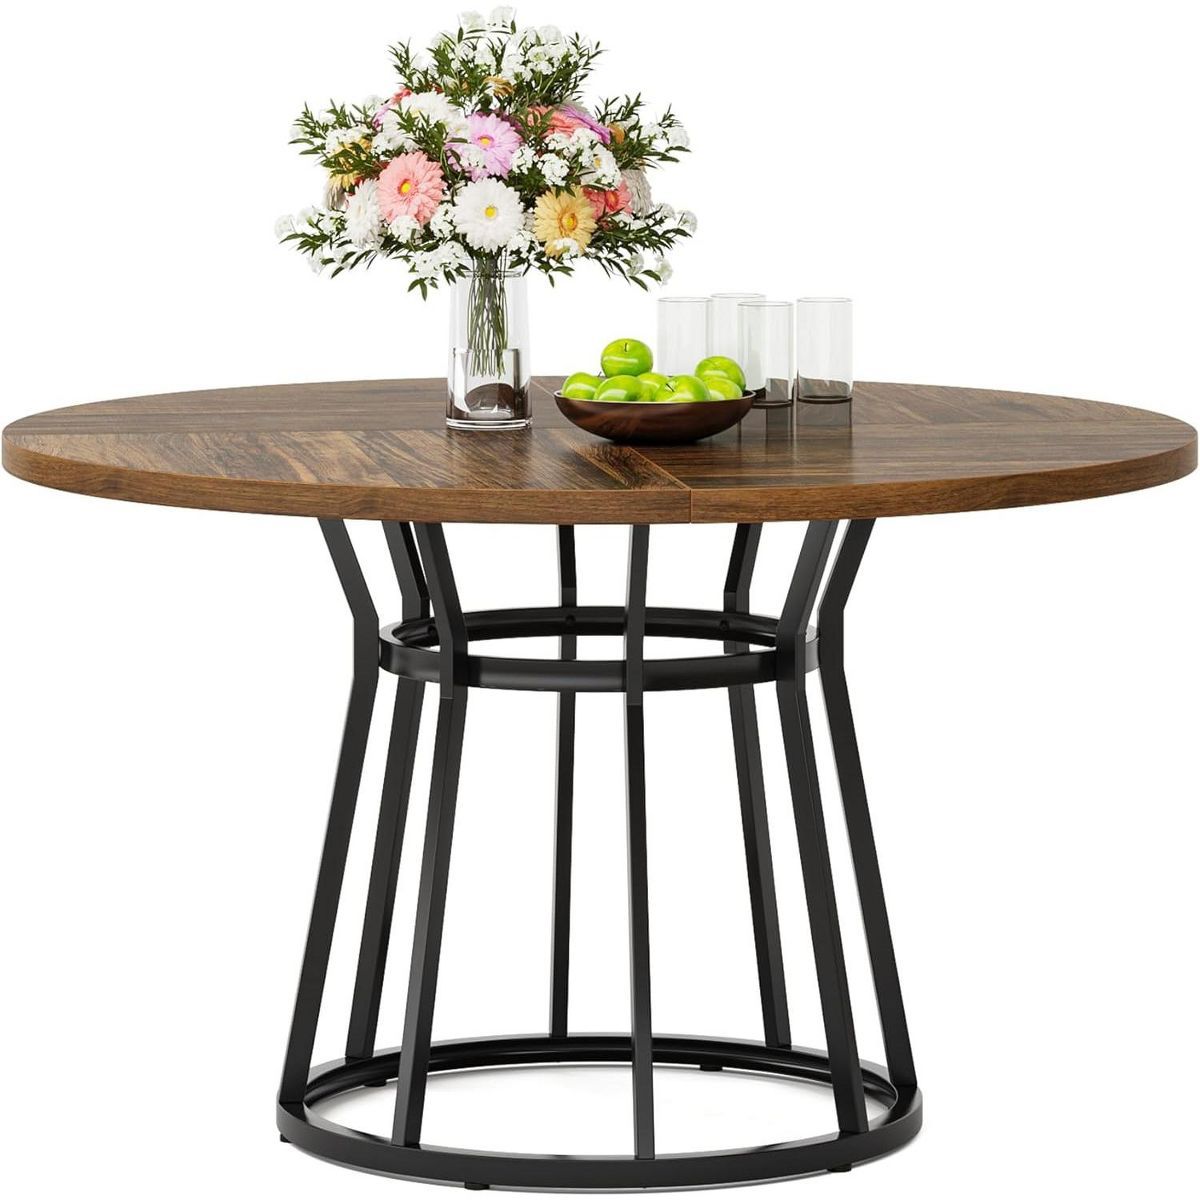 Tribesigns 47.2-Inch Round Dining Table for 4 People, Circle Dining Room Table with Metal Base | Target